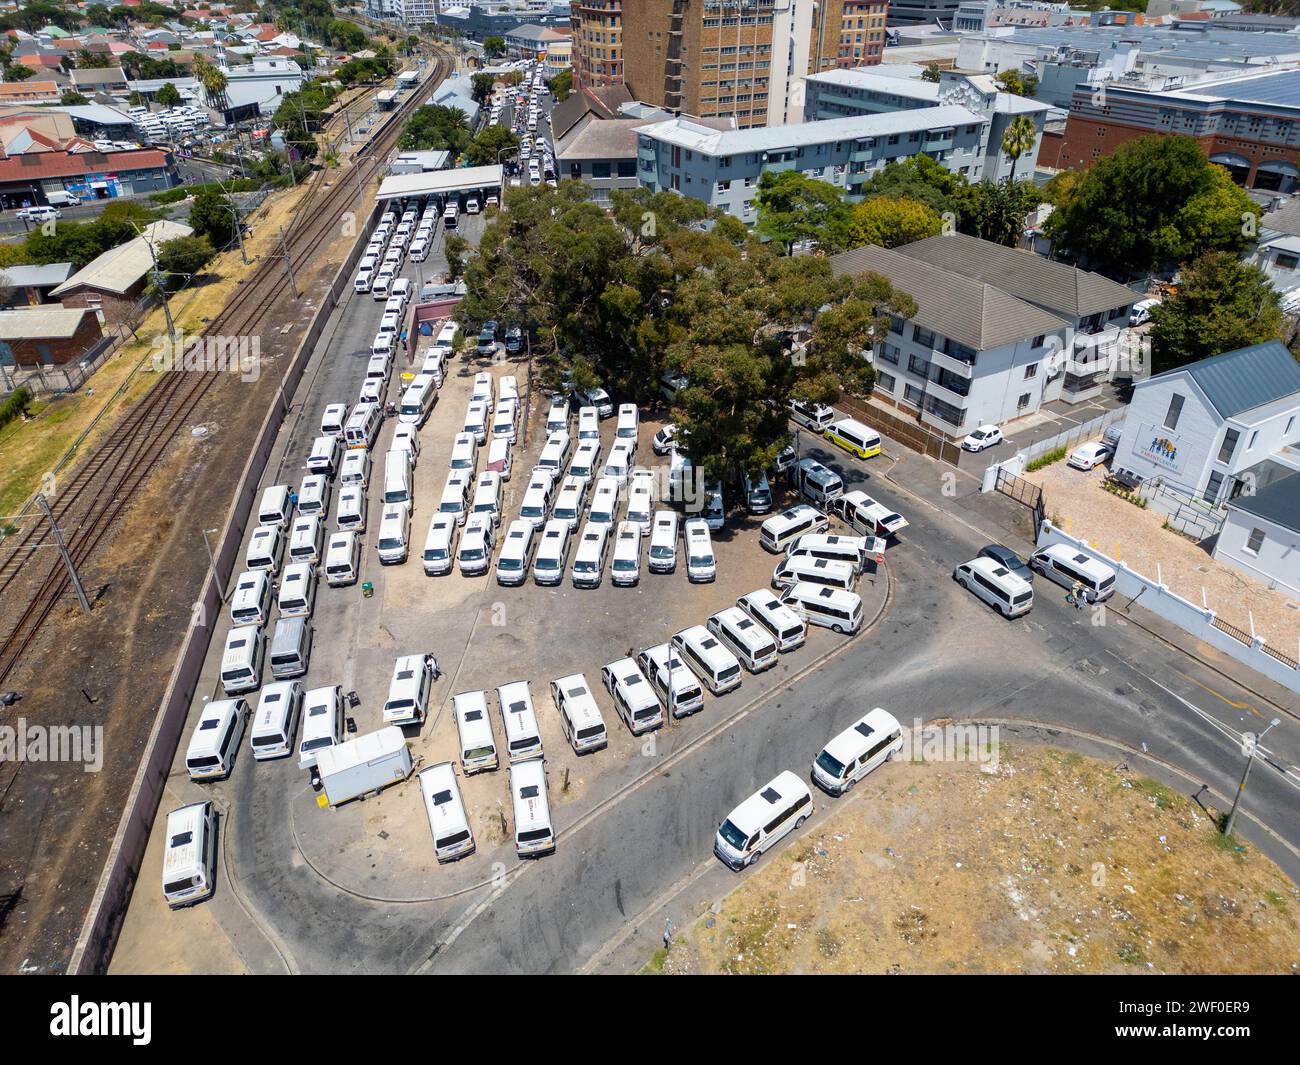 Minibus Taxi depot, Wynberg, Cape Town, South Africa 7708 Stock Photo